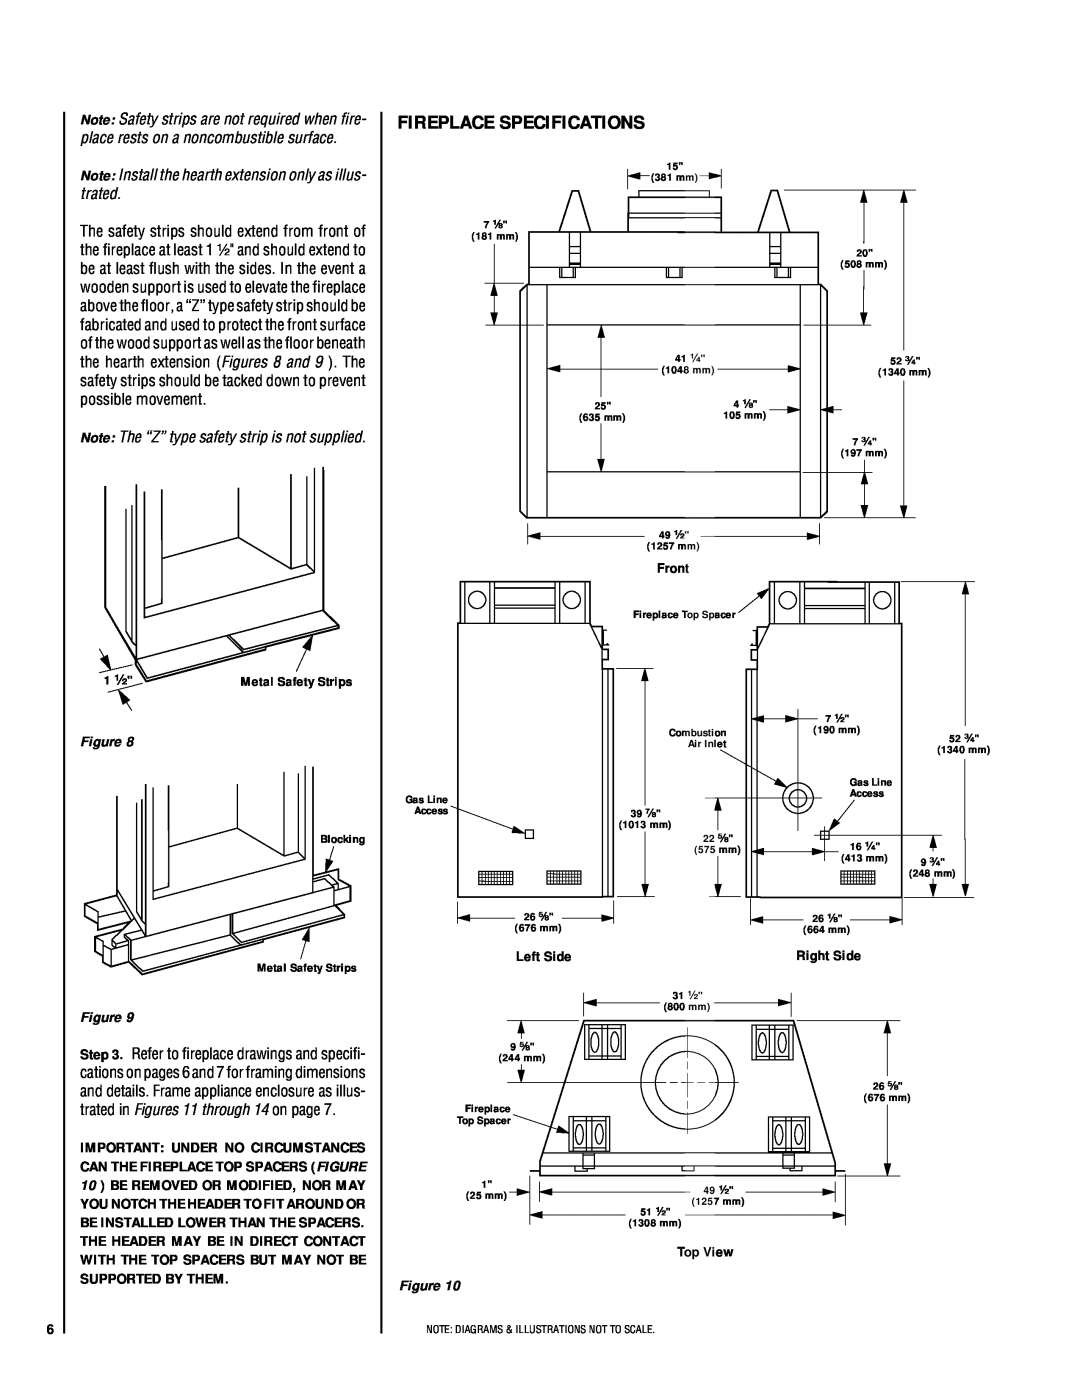 Lennox Hearth LA41TCF, LA41CF Fireplace Specifications, Note The “Z” type safety strip is not supplied 